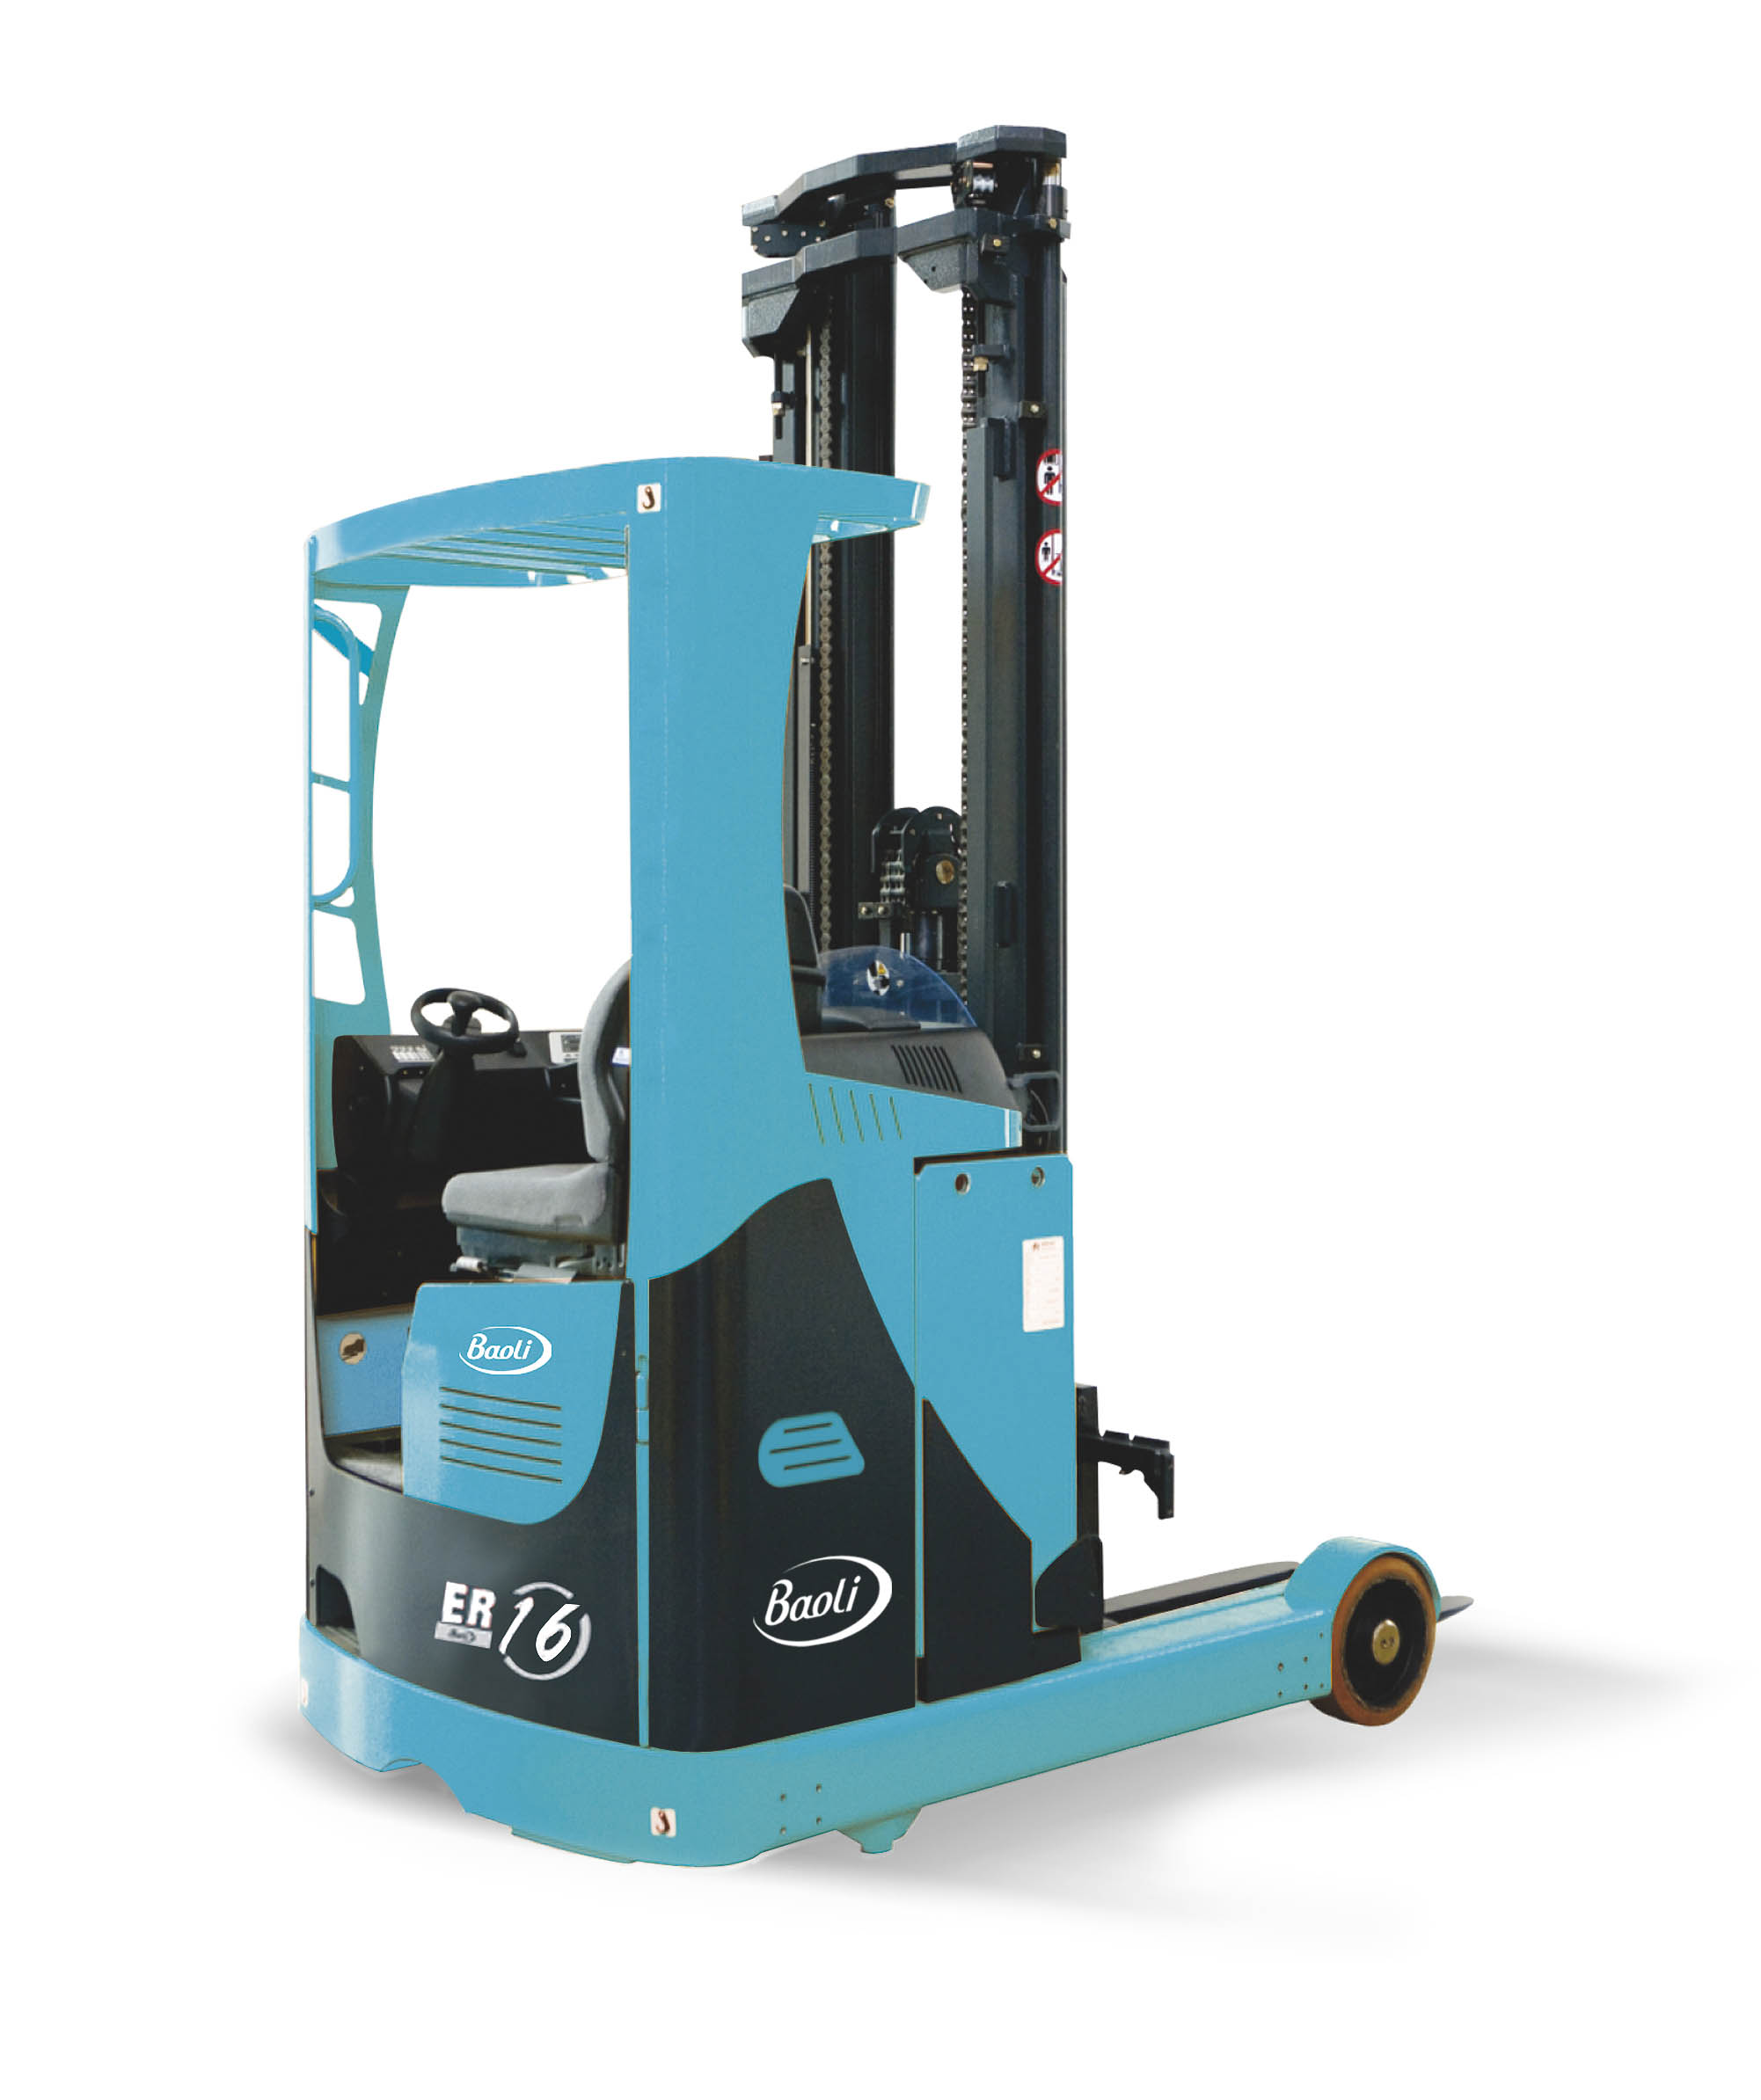 The Baoli reach truck ER16 premiere was at the centre of attention at the stand.